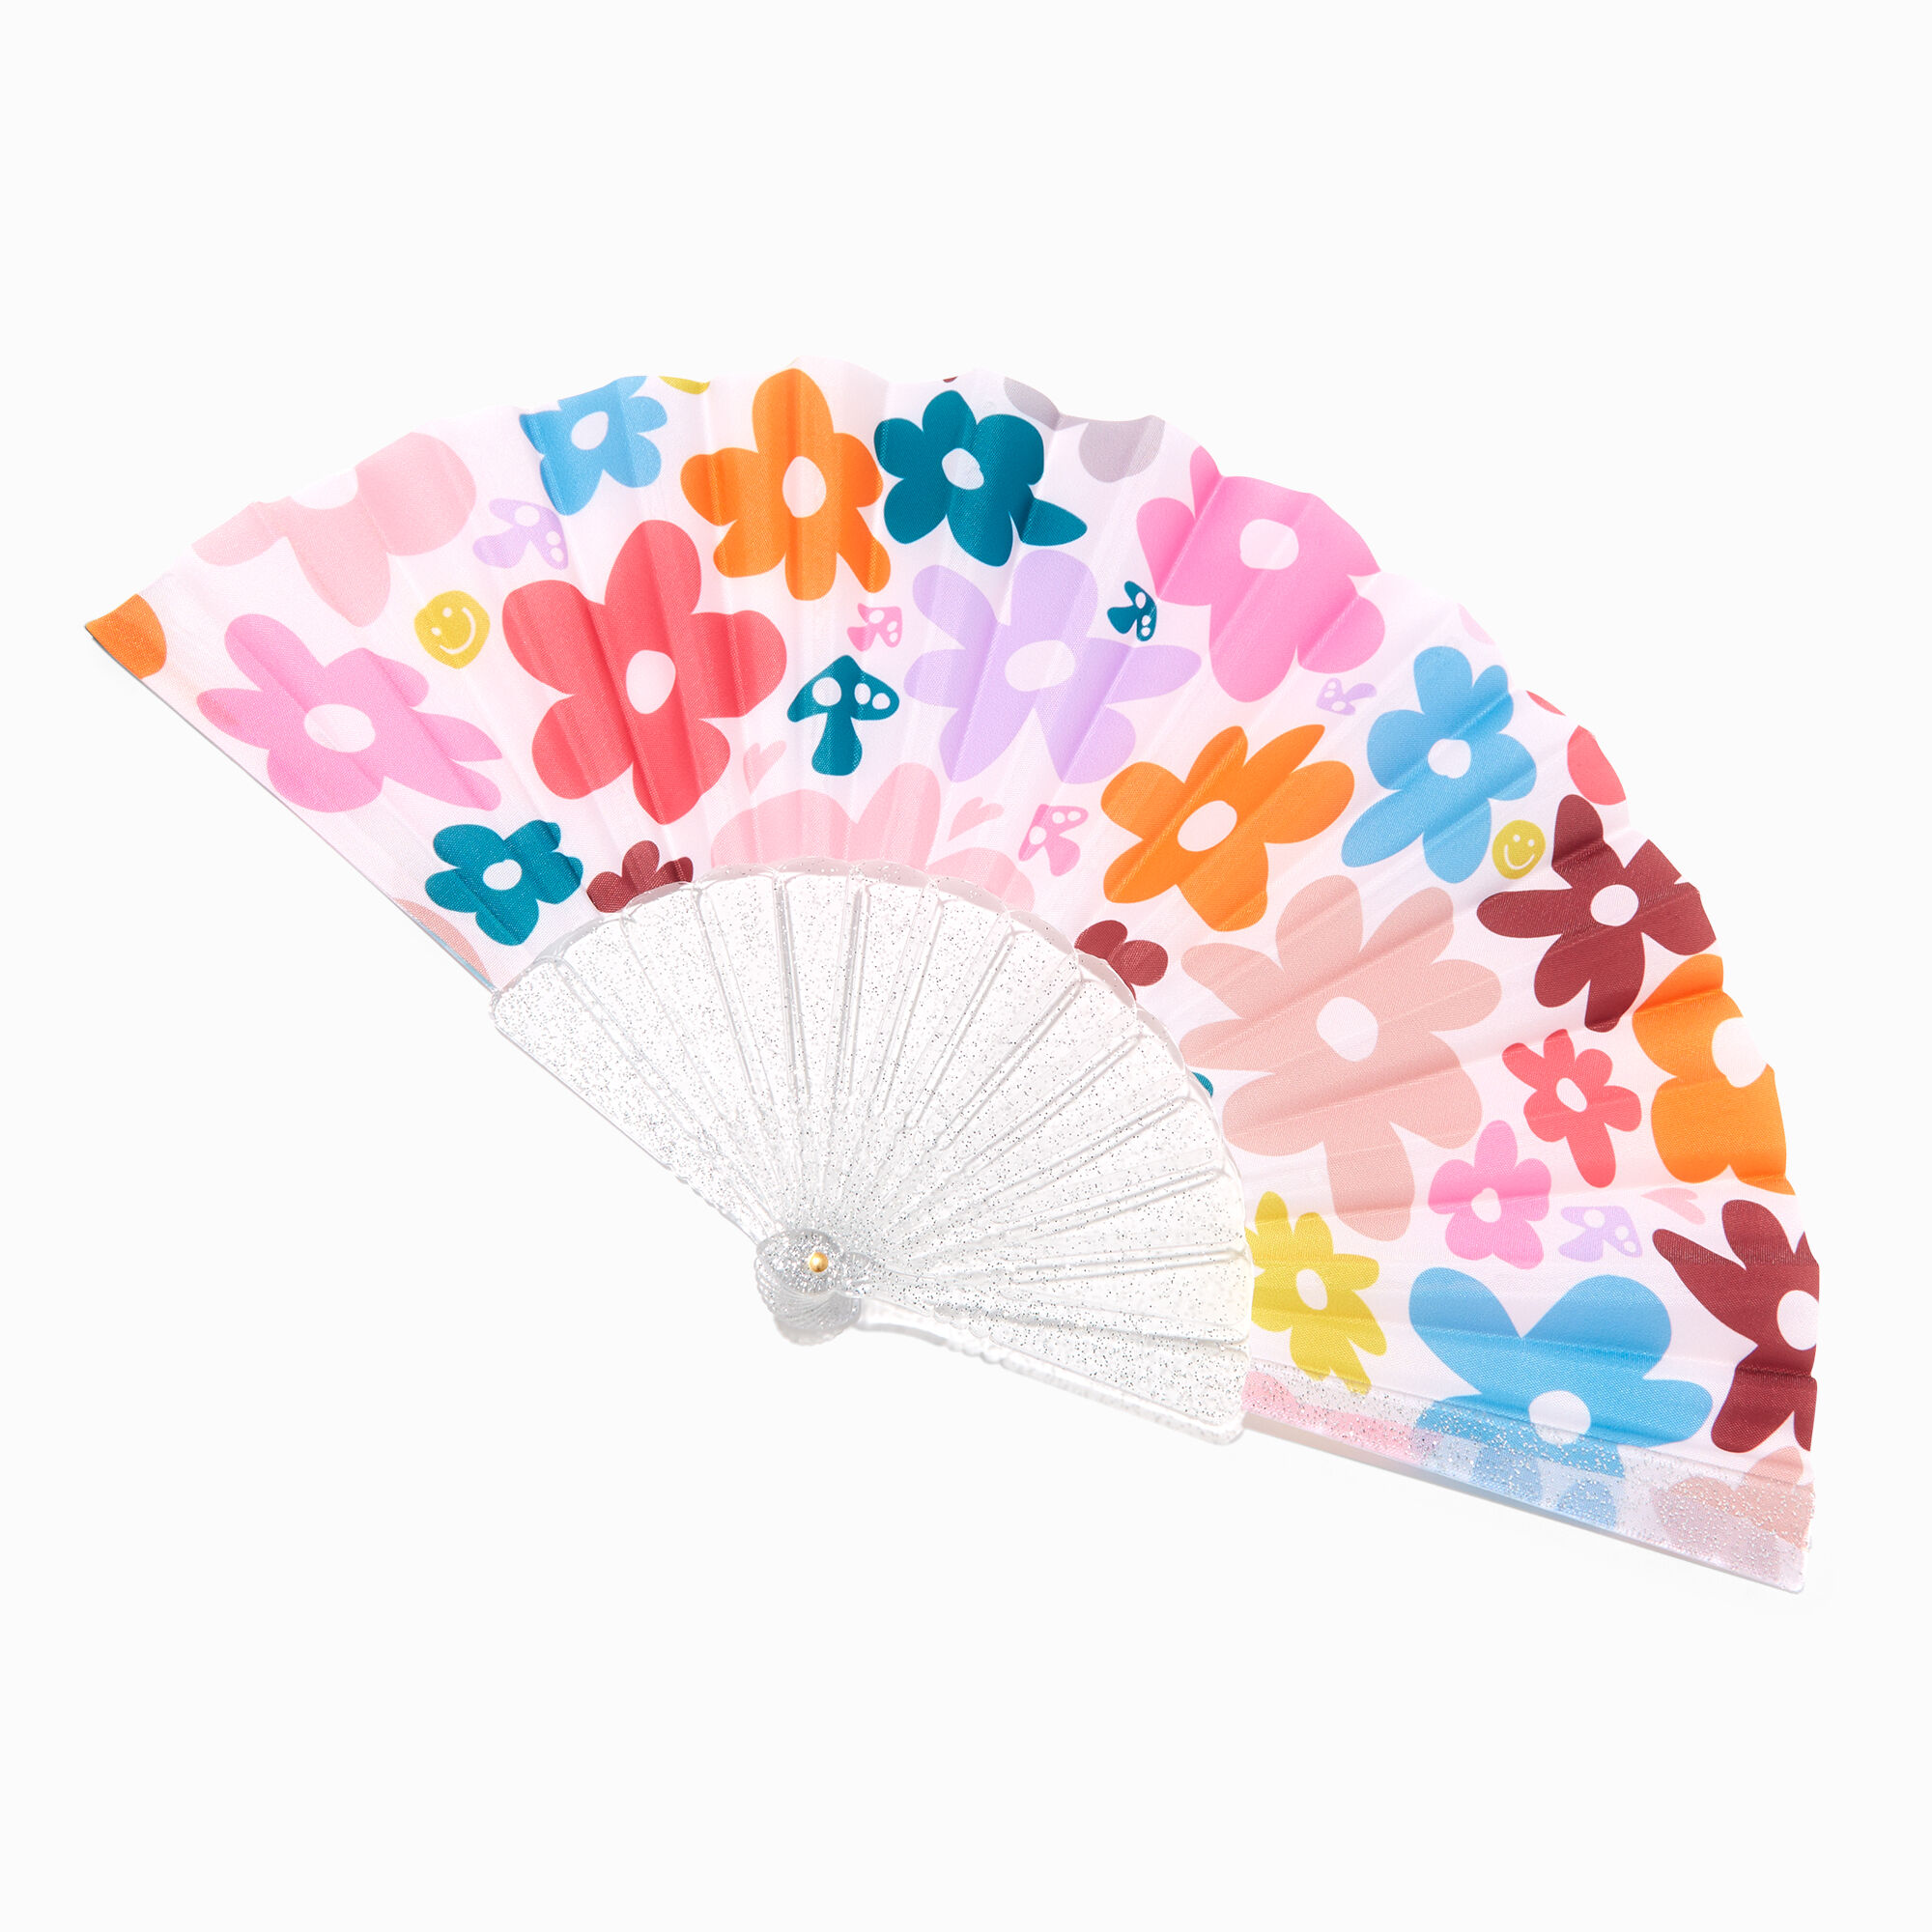 View Claires Happy Daisies Folding Fan Rainbow information